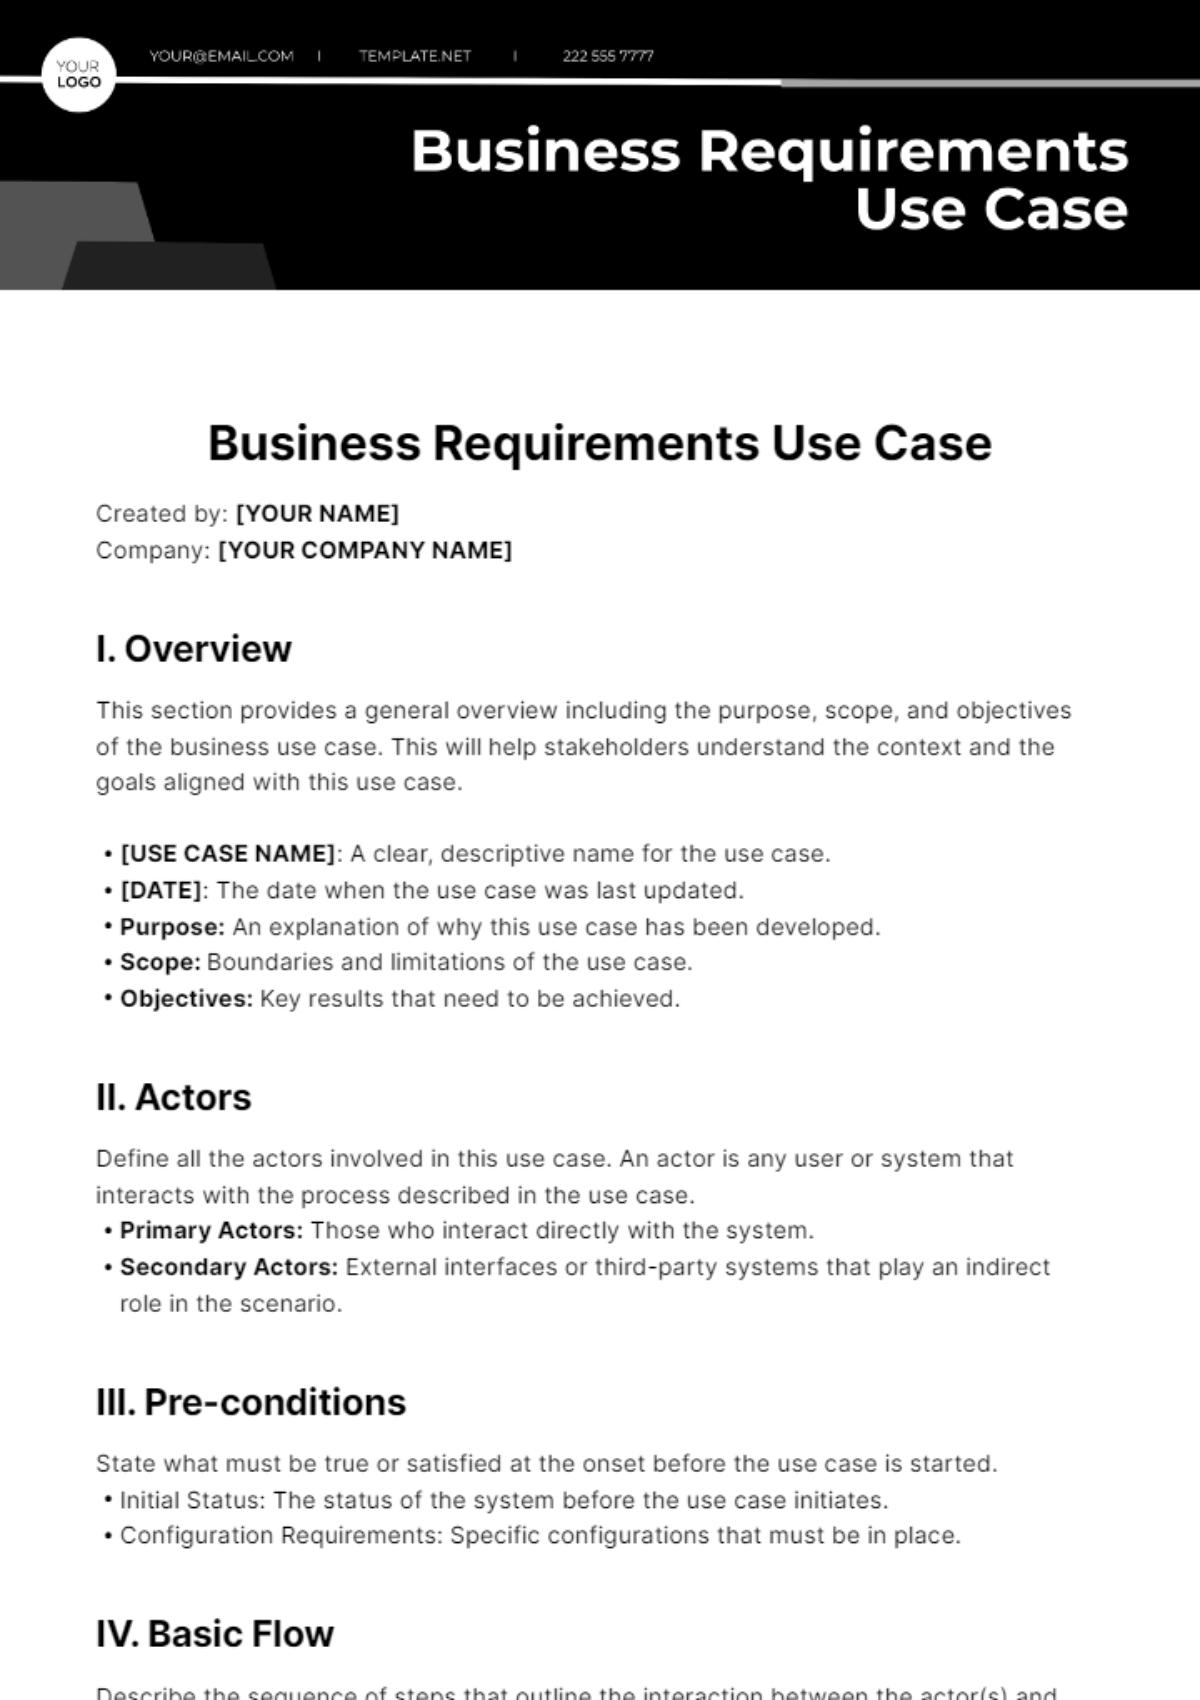 Business Requirements Use Case Template